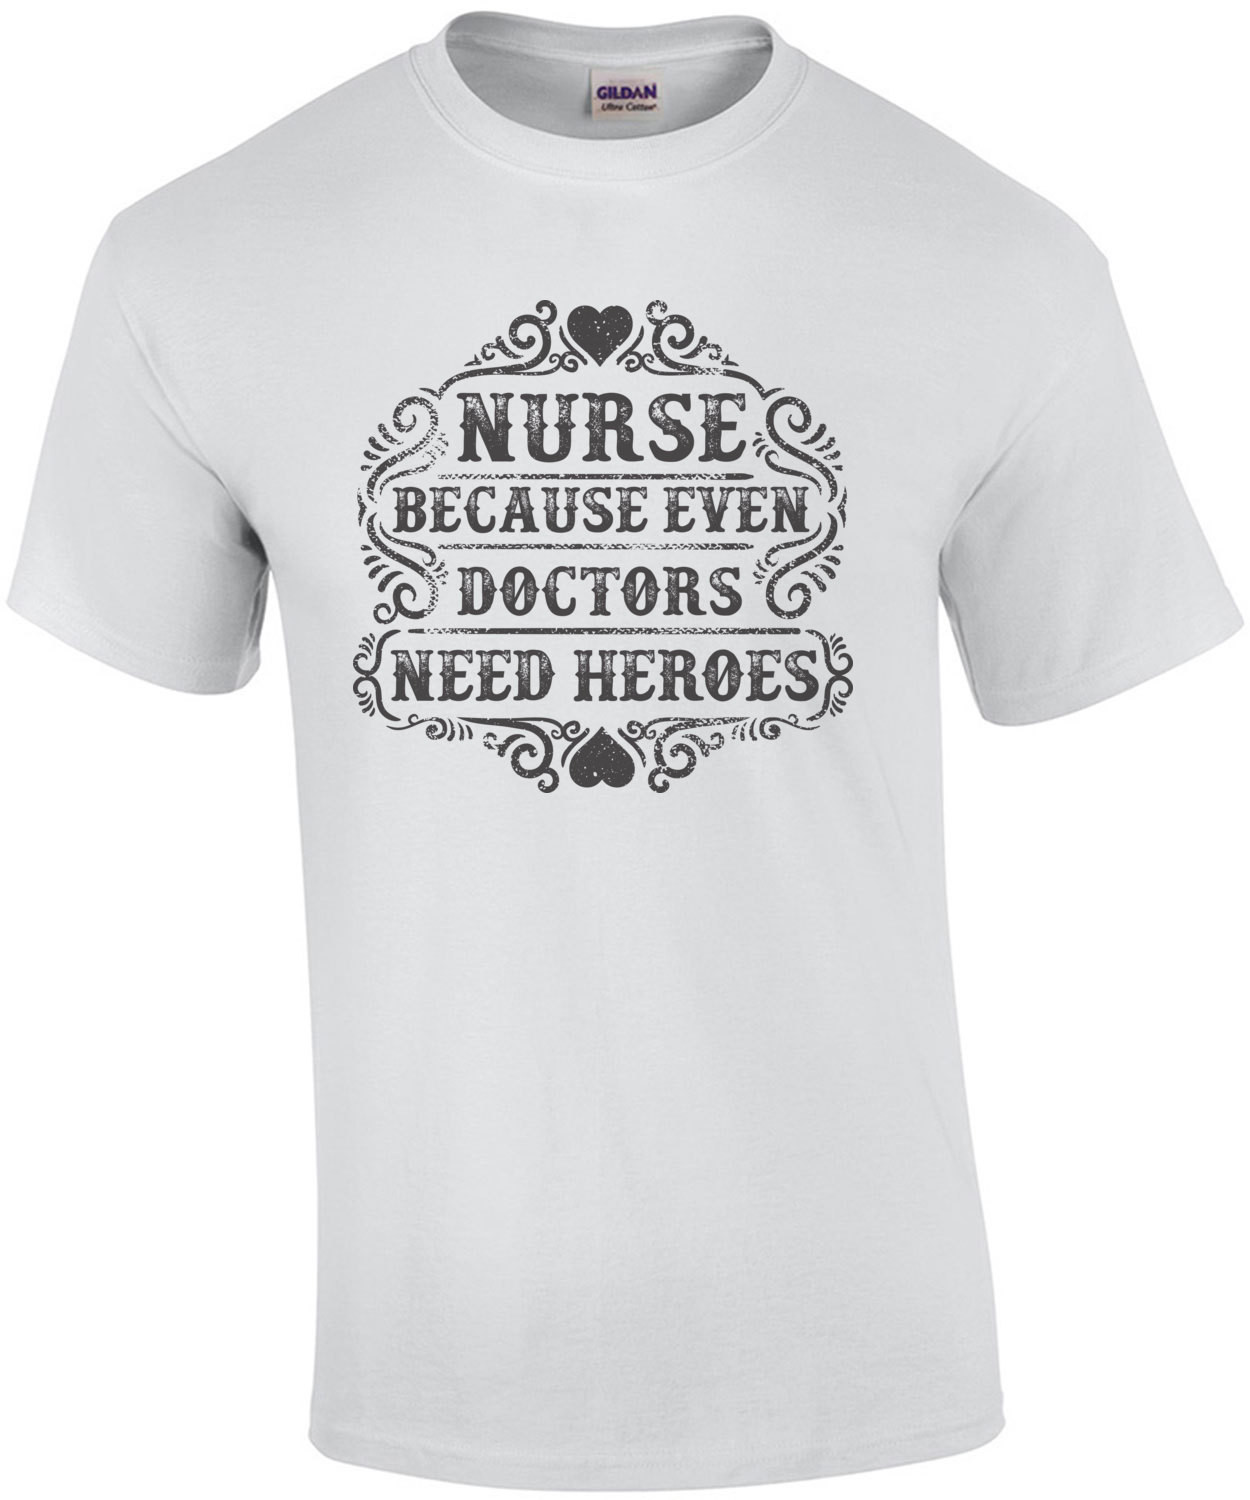 Nurse Because Even Doctors Need Heroes T-Shirt